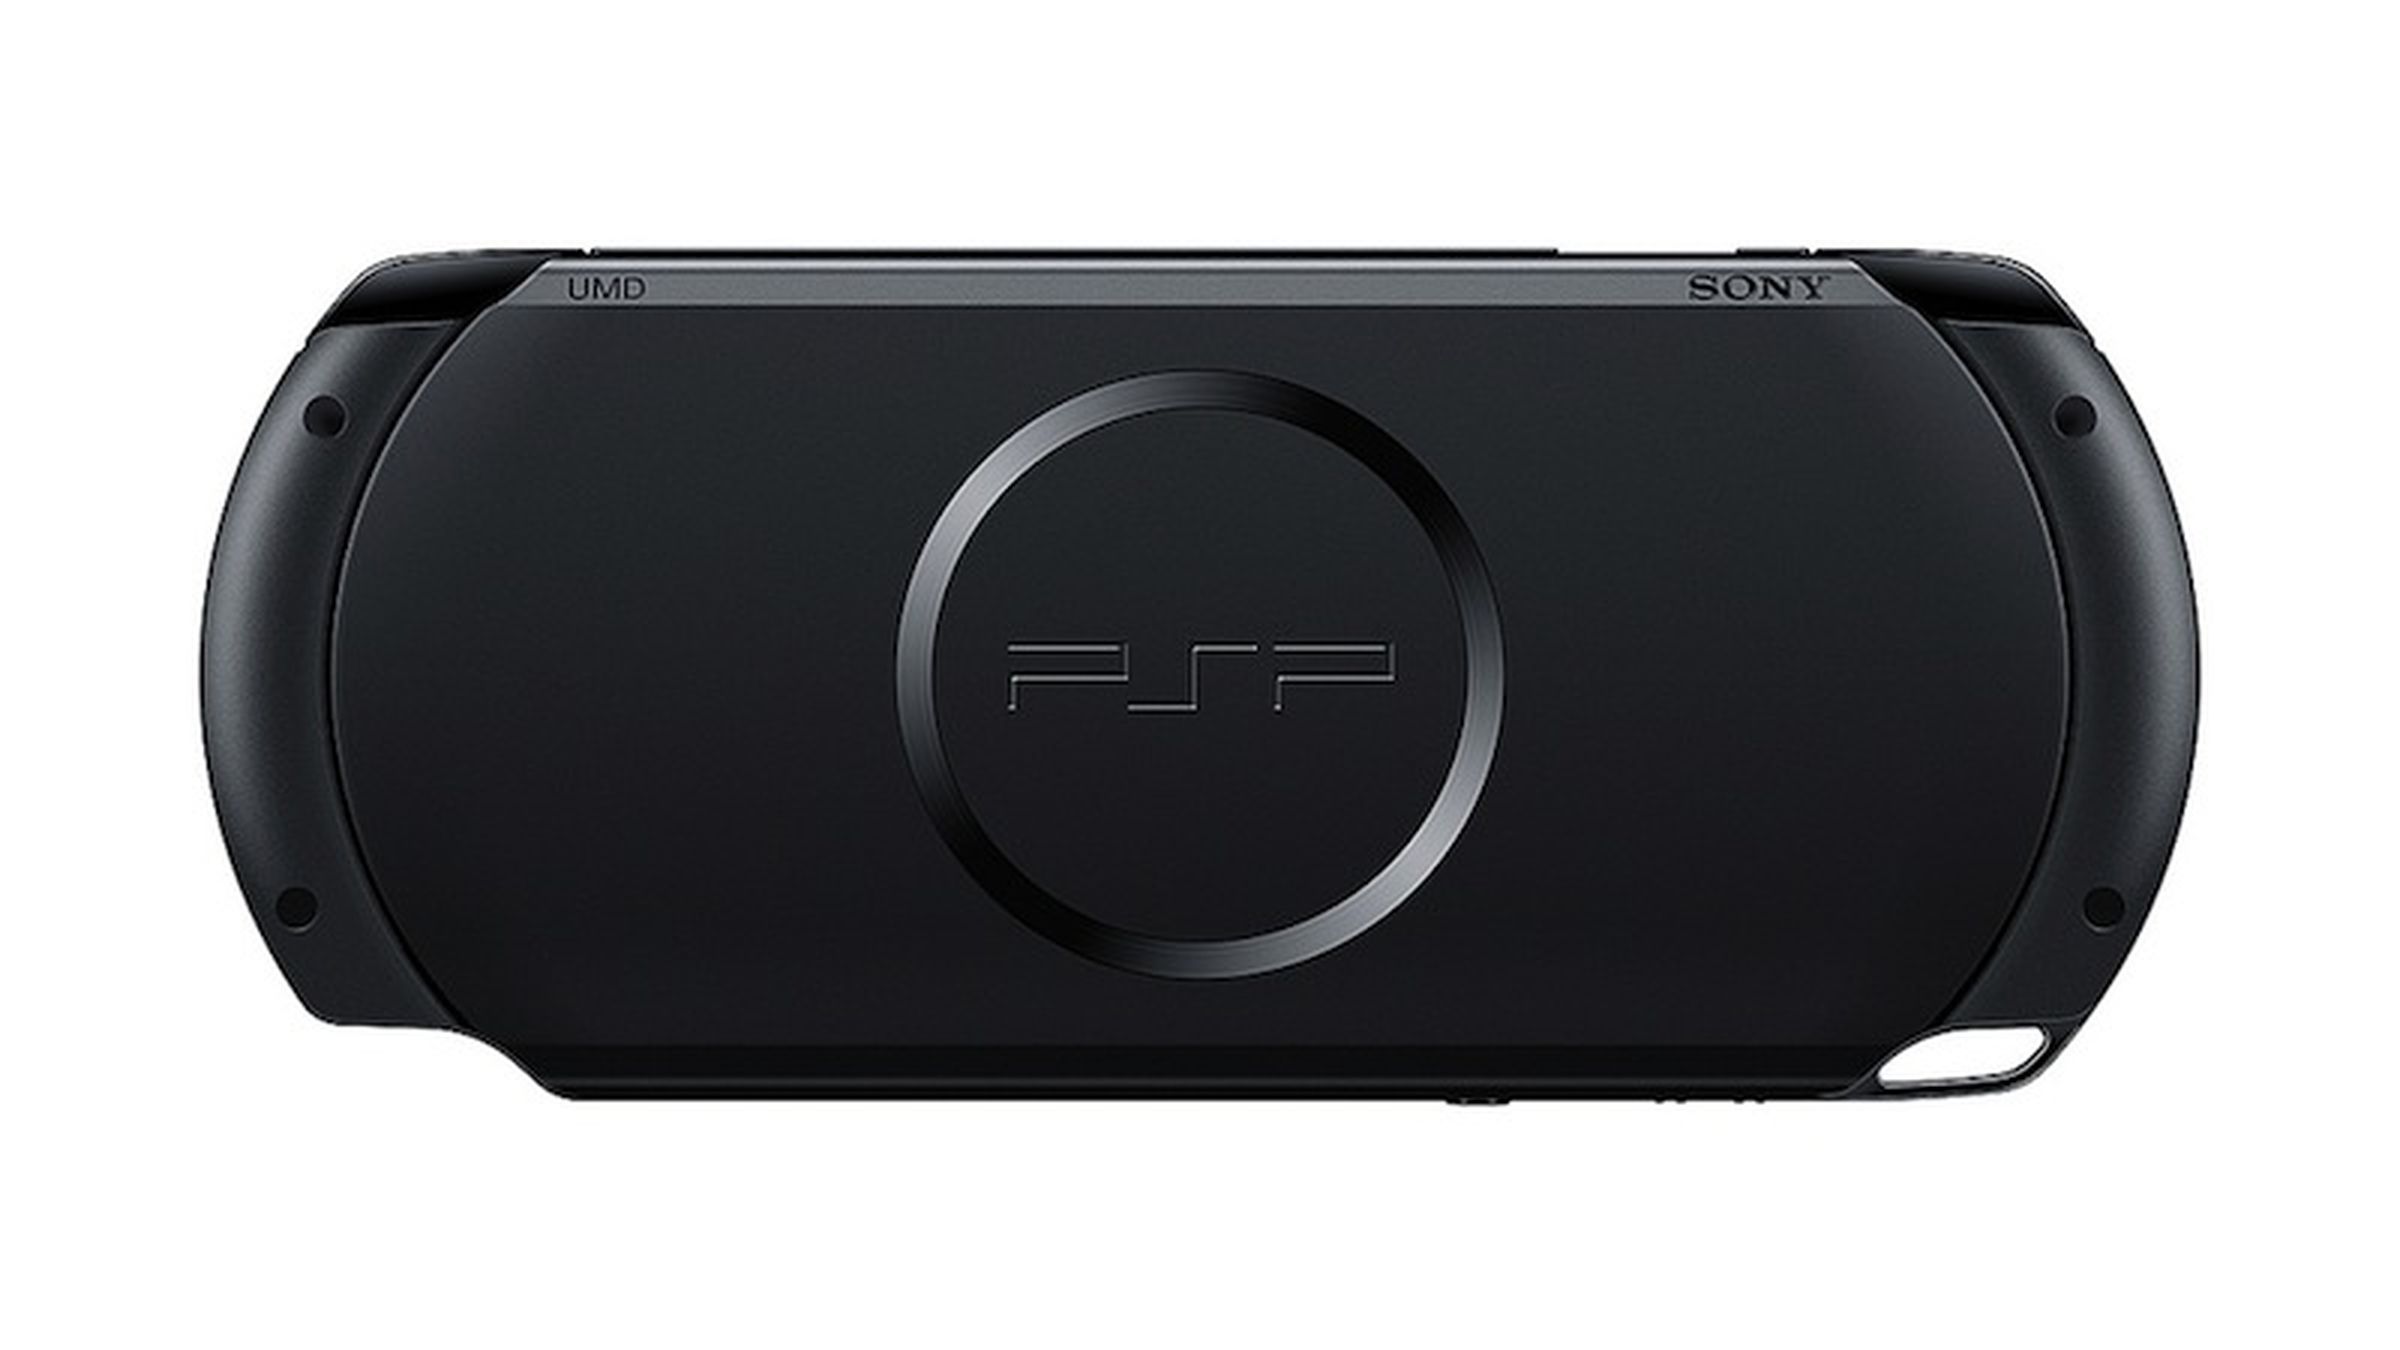 Sony PSP E-1000 lacks Wi-Fi, coming this fall for €99 only to Europe